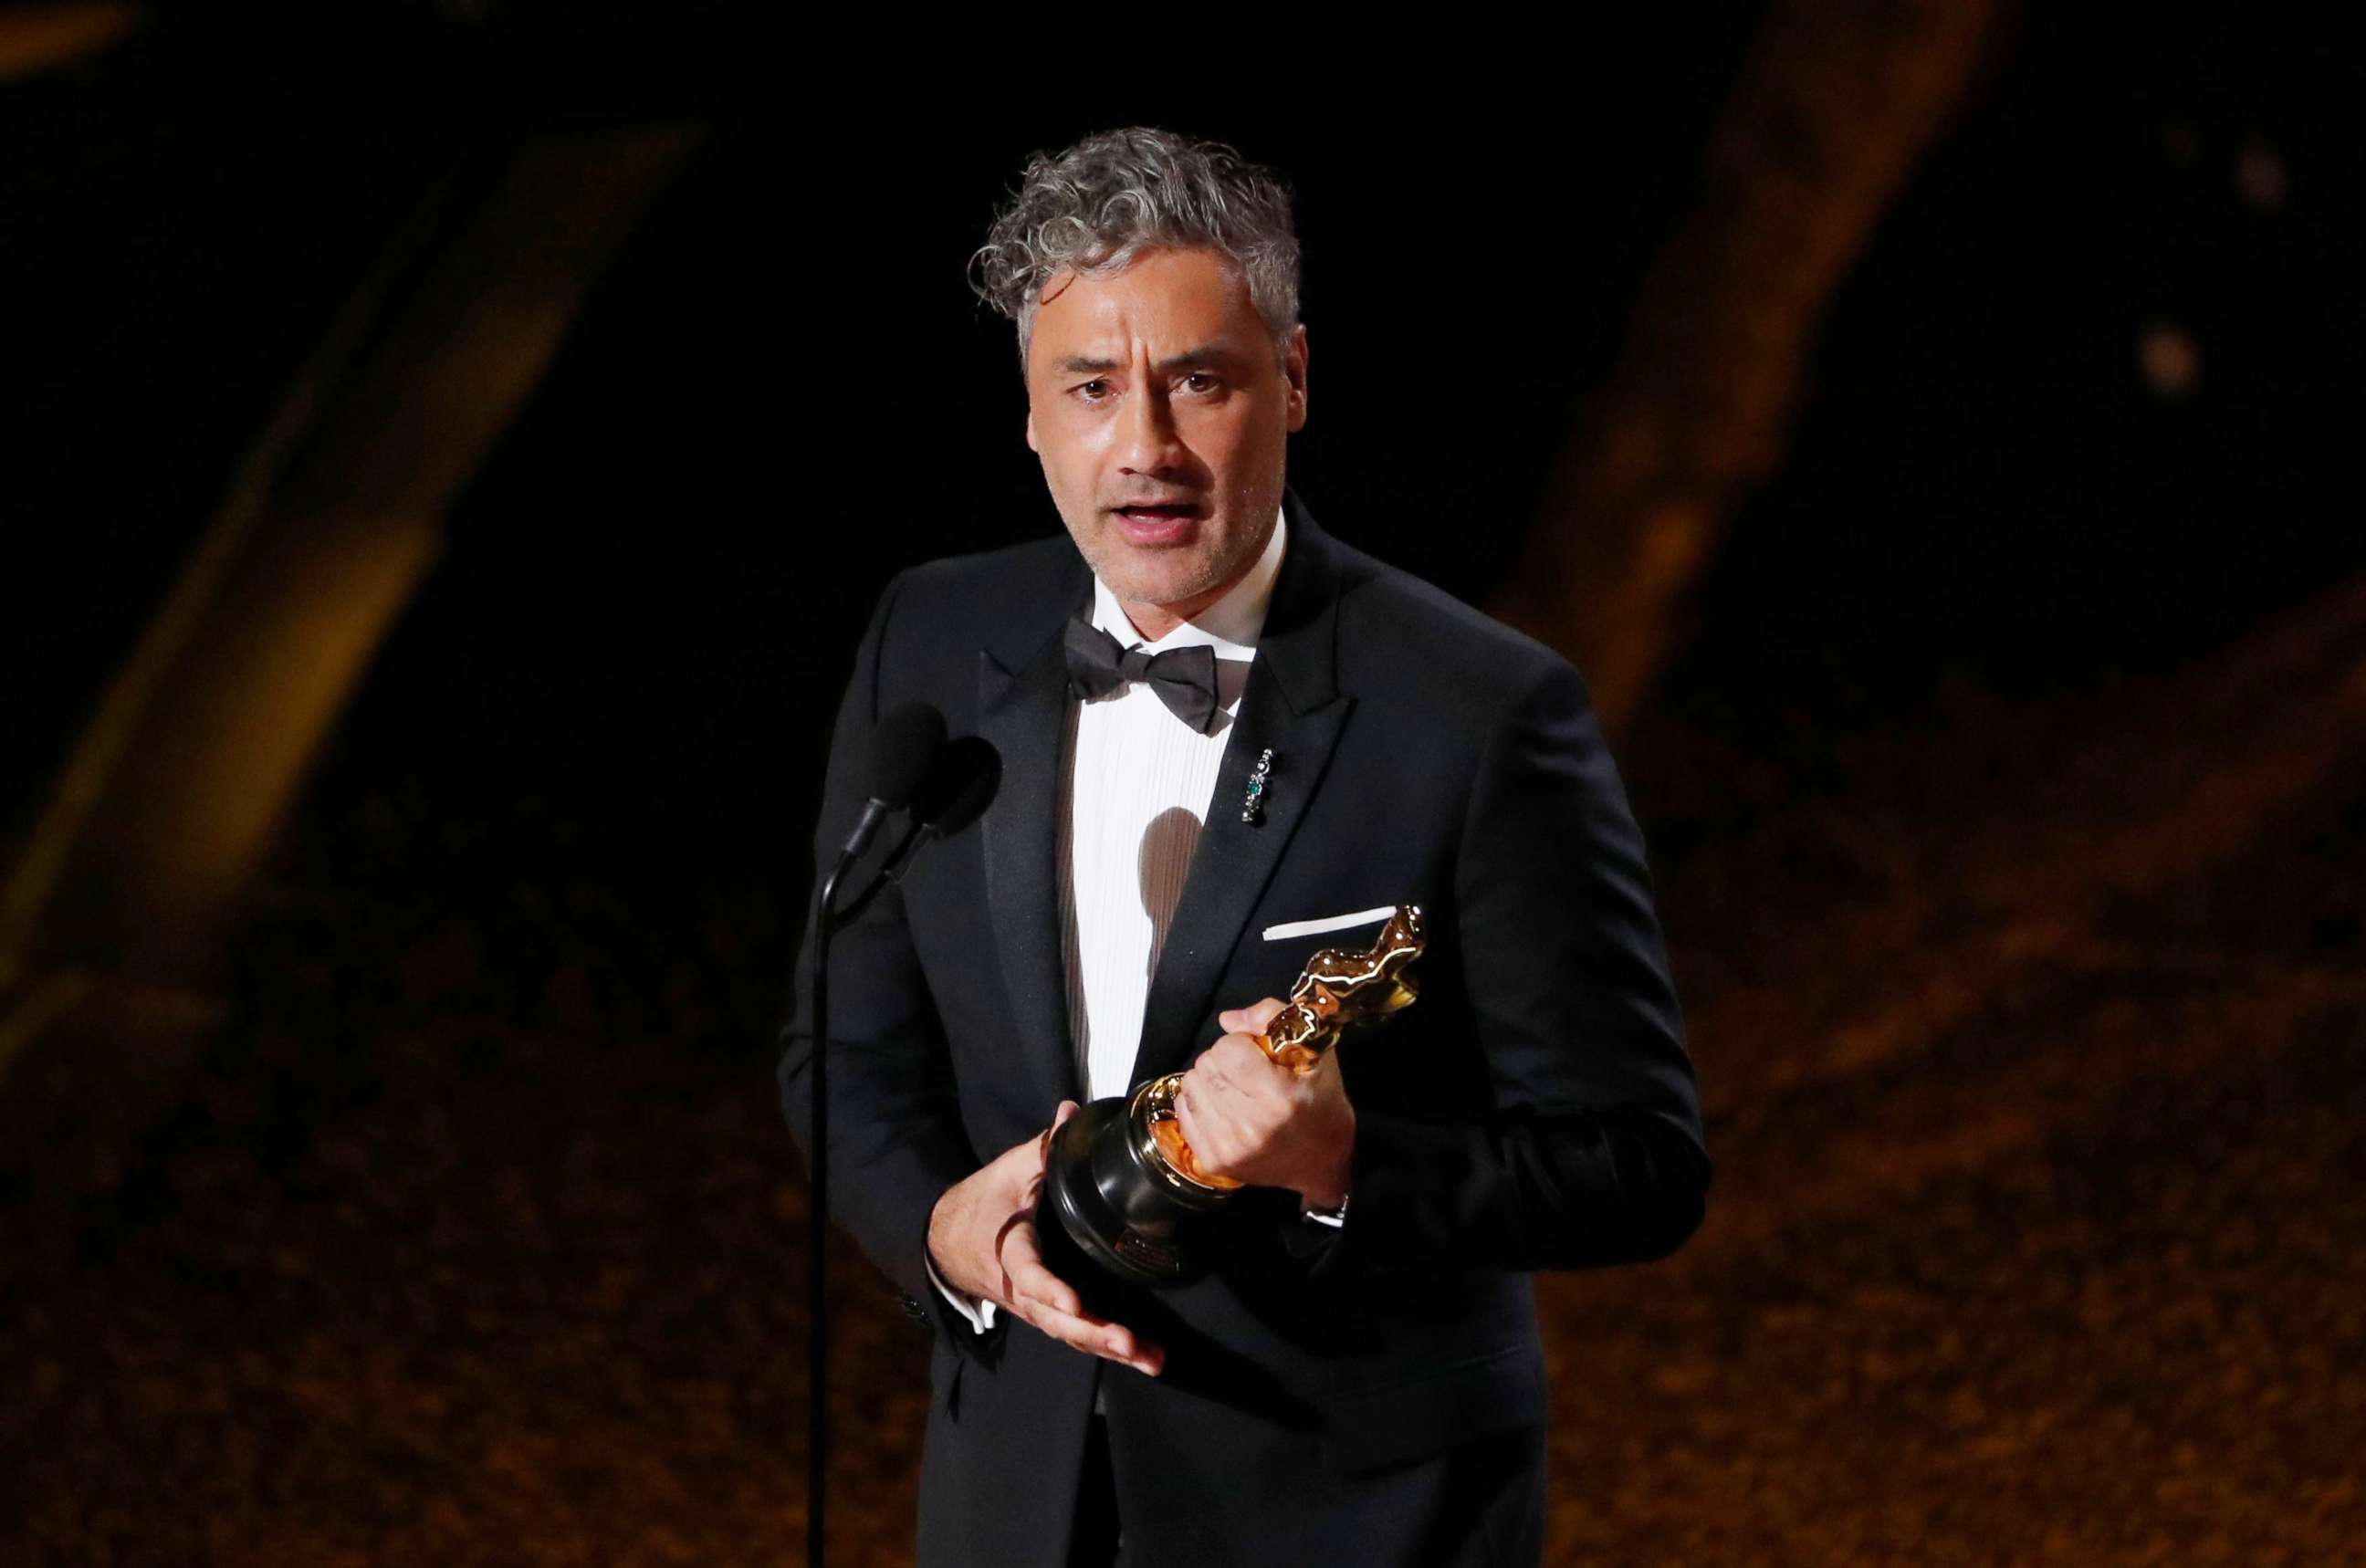 PHOTO: Taika Waititi accepts the award for Best Adapted Screenplay for 'Jojo Rabbit' at the 92nd Academy Awards in Hollywood, Calif., Feb. 9, 2020.